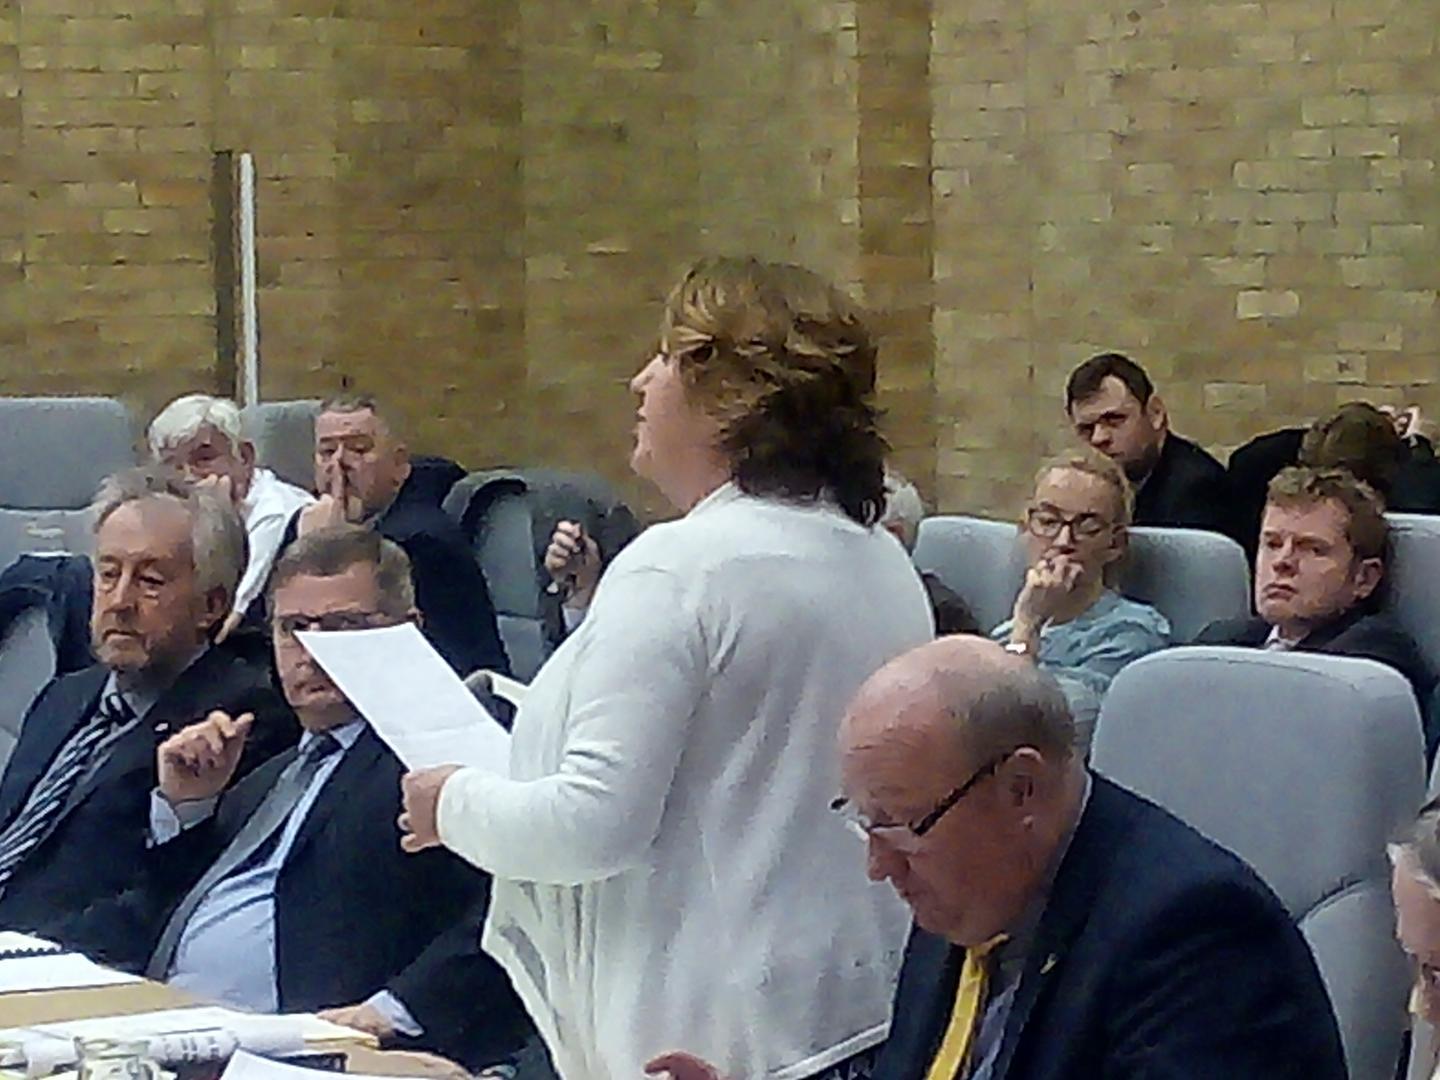 Cllr Jane Carr (Lib Dem, Newport Pagnell South) appealed for the council not to get political over domestic abuse. The Conservatives had proposed spending 440,000 more on projects to reduce it, but she said it was important for the parties to work together on solutions.